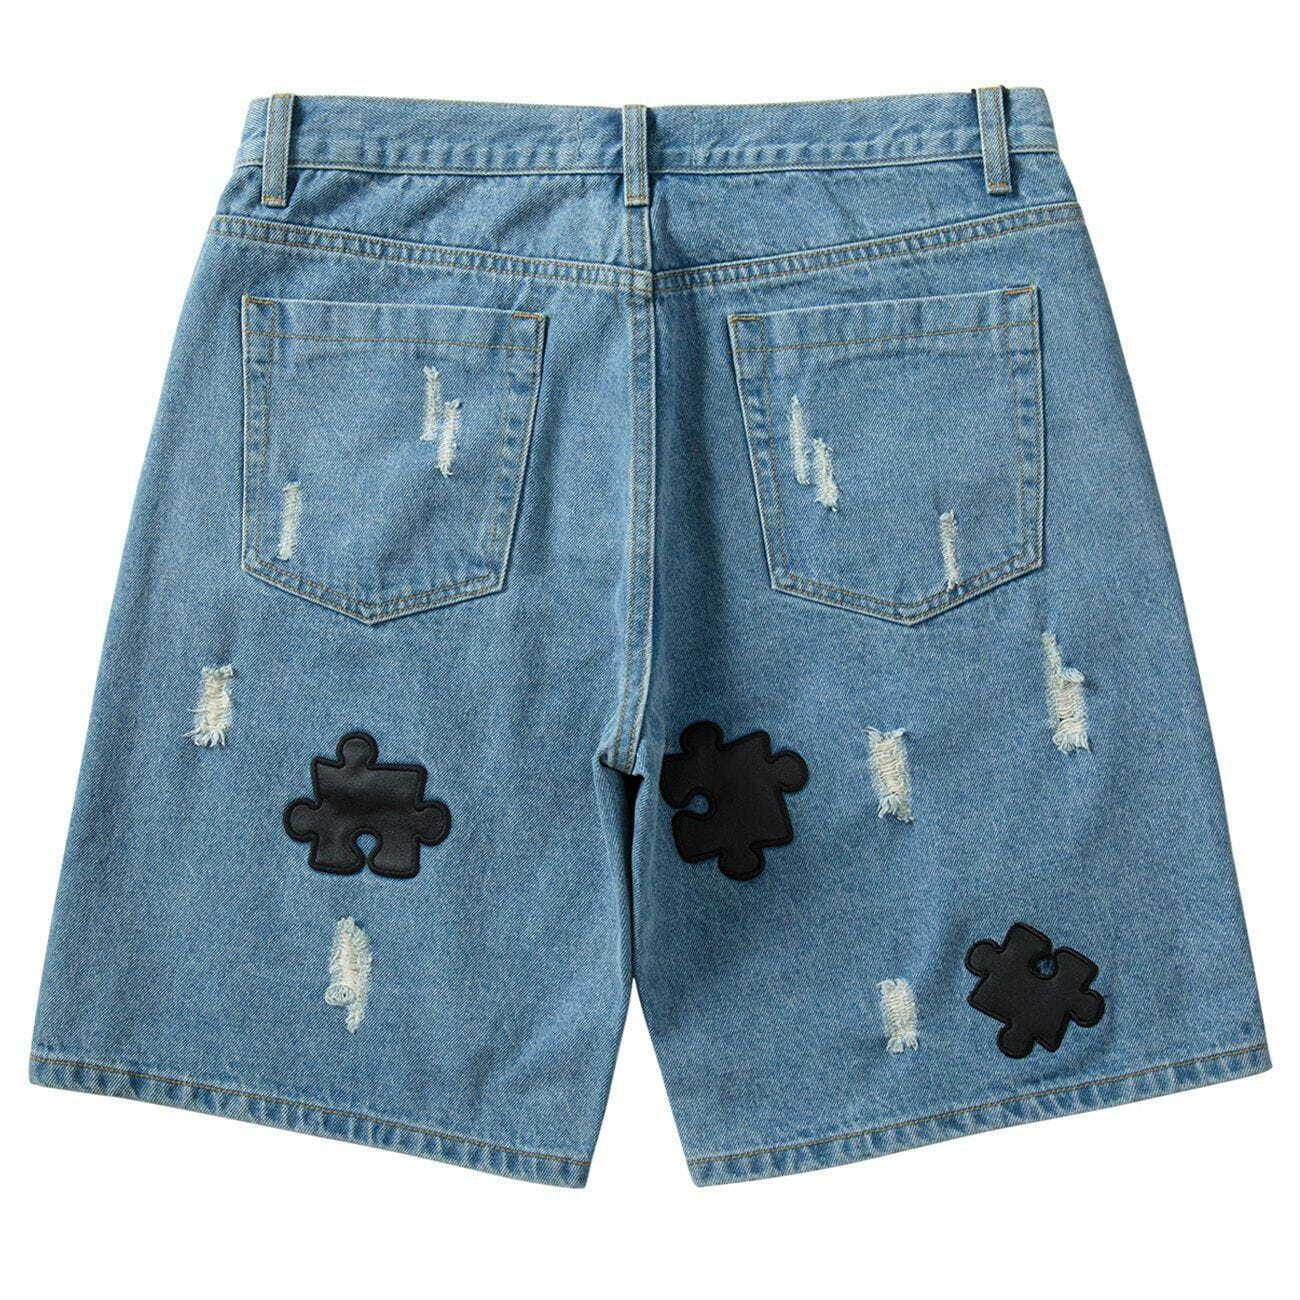 retro zipup puzzle shorts edgy streetwear chic 5569